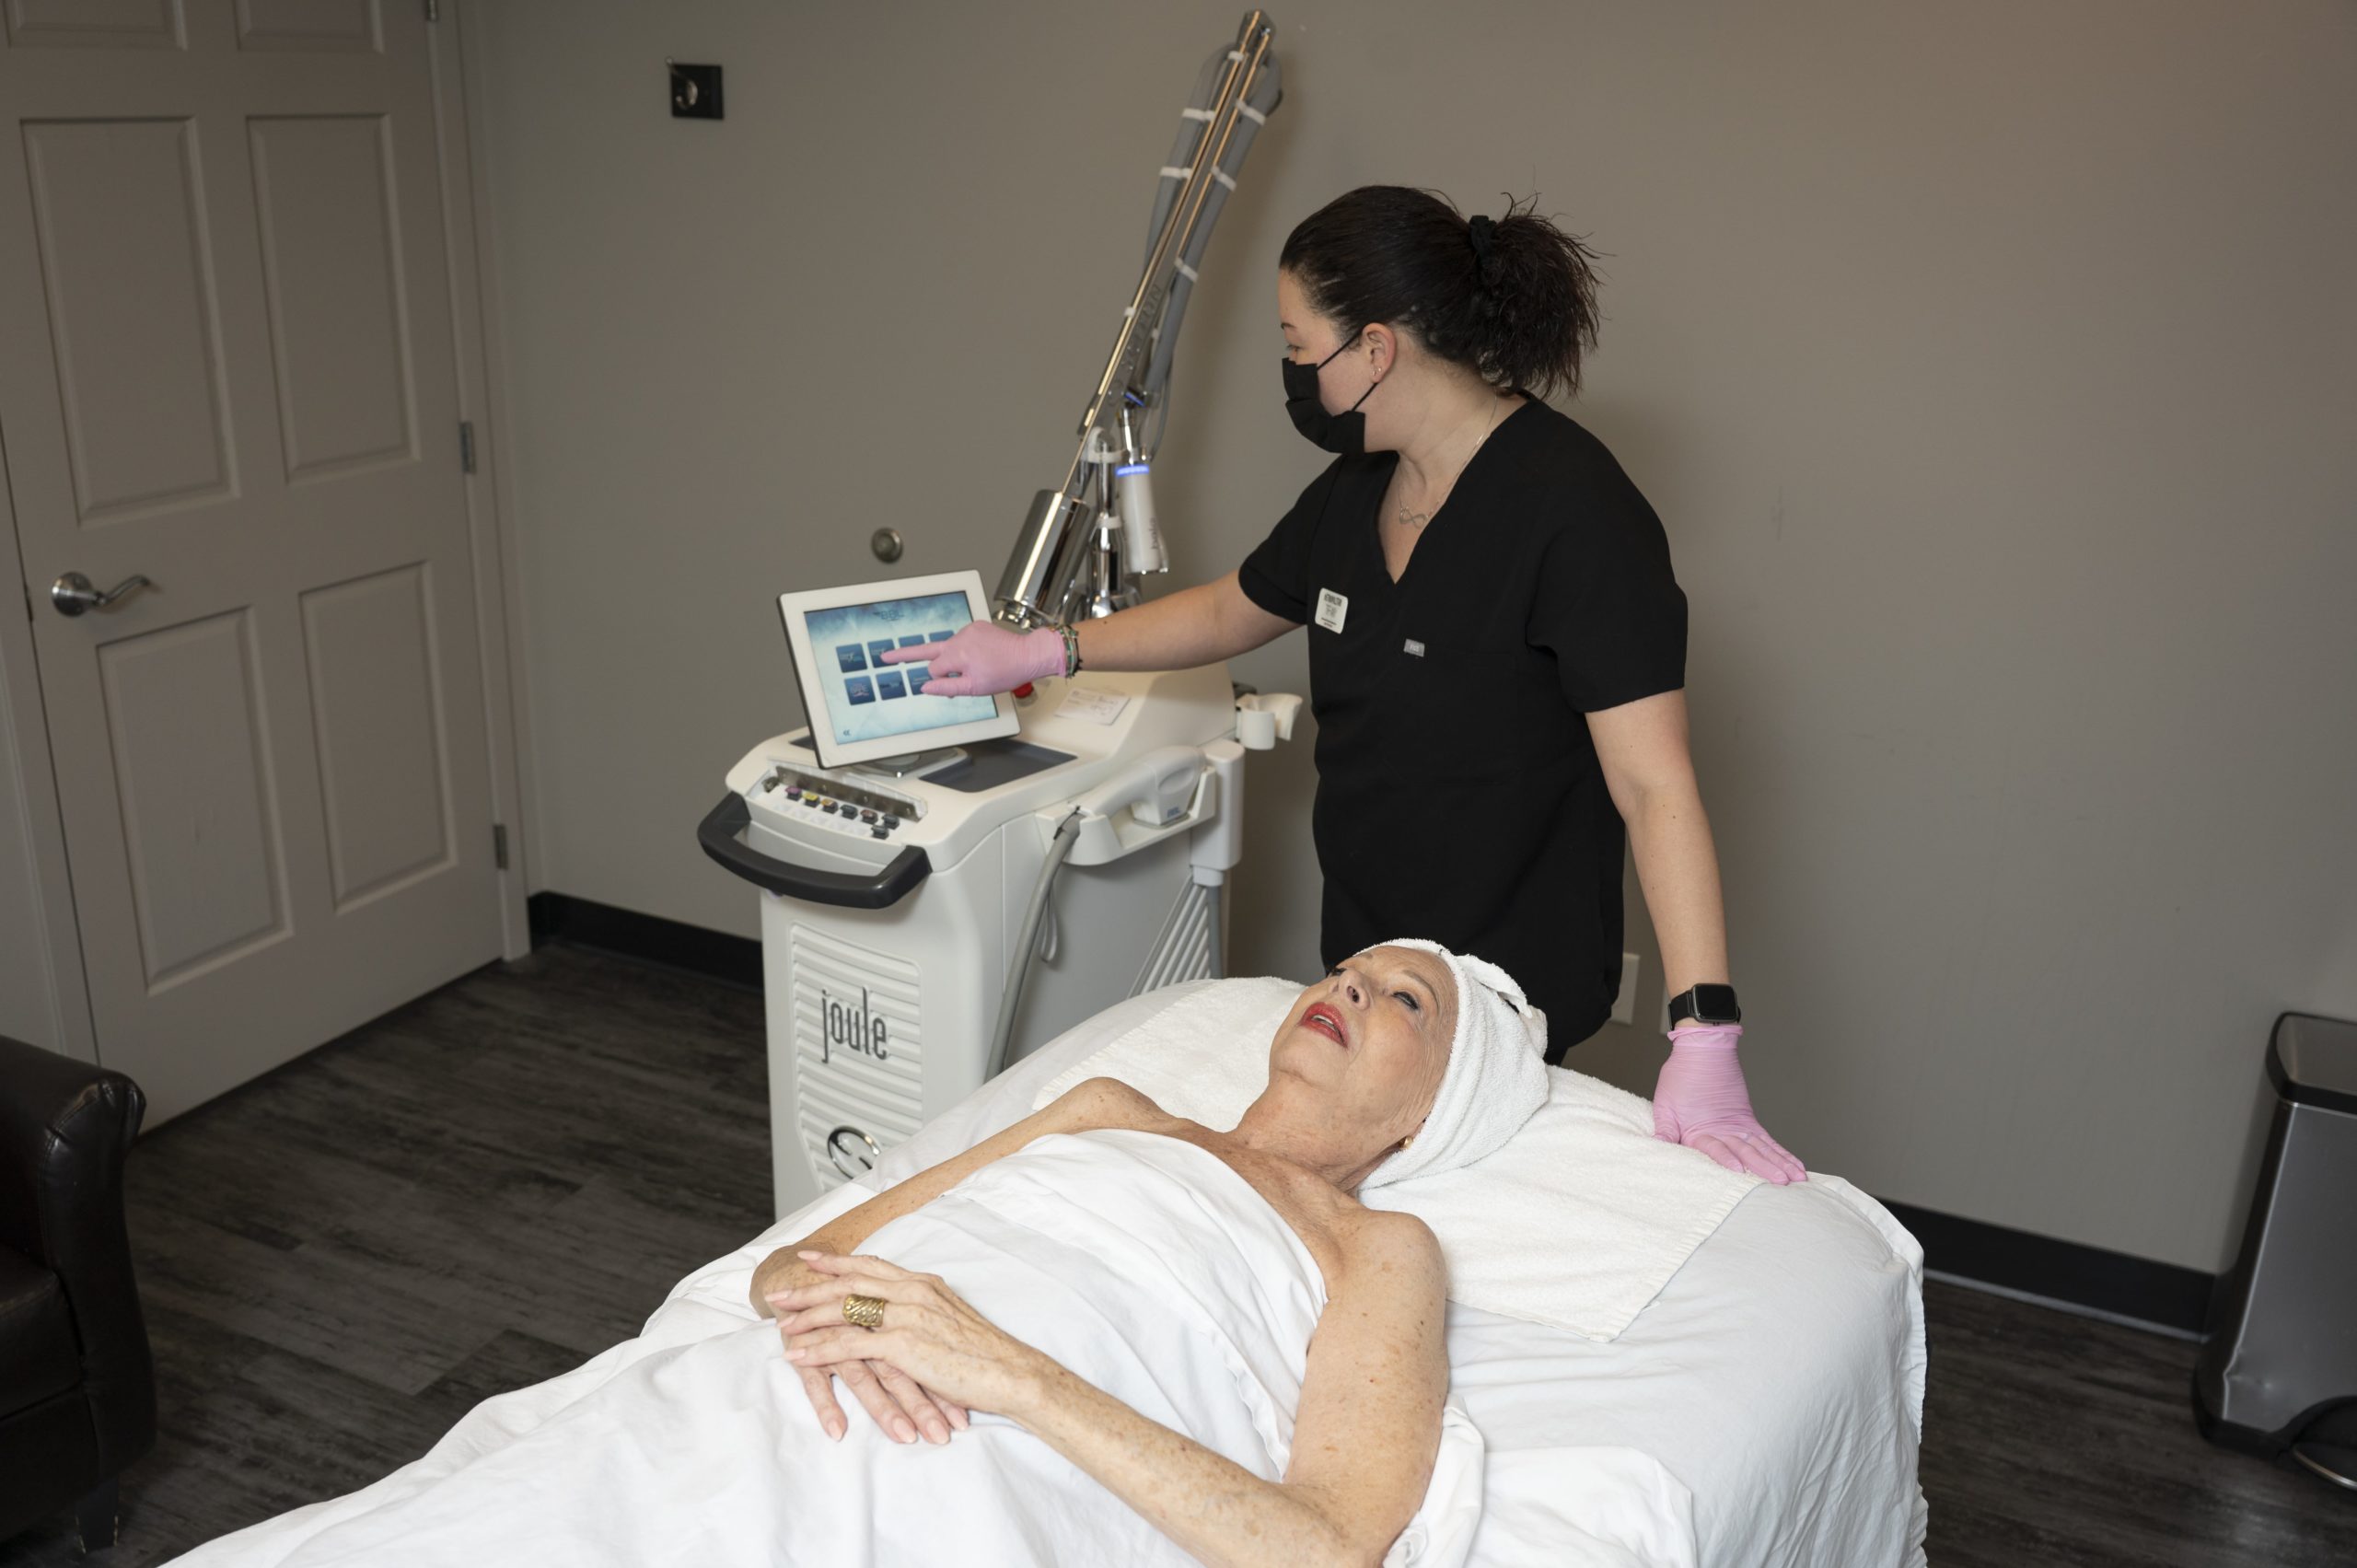 HALO<span class="other-font">®</span> Laser Skin Resurfacing in the Minneapolis Area